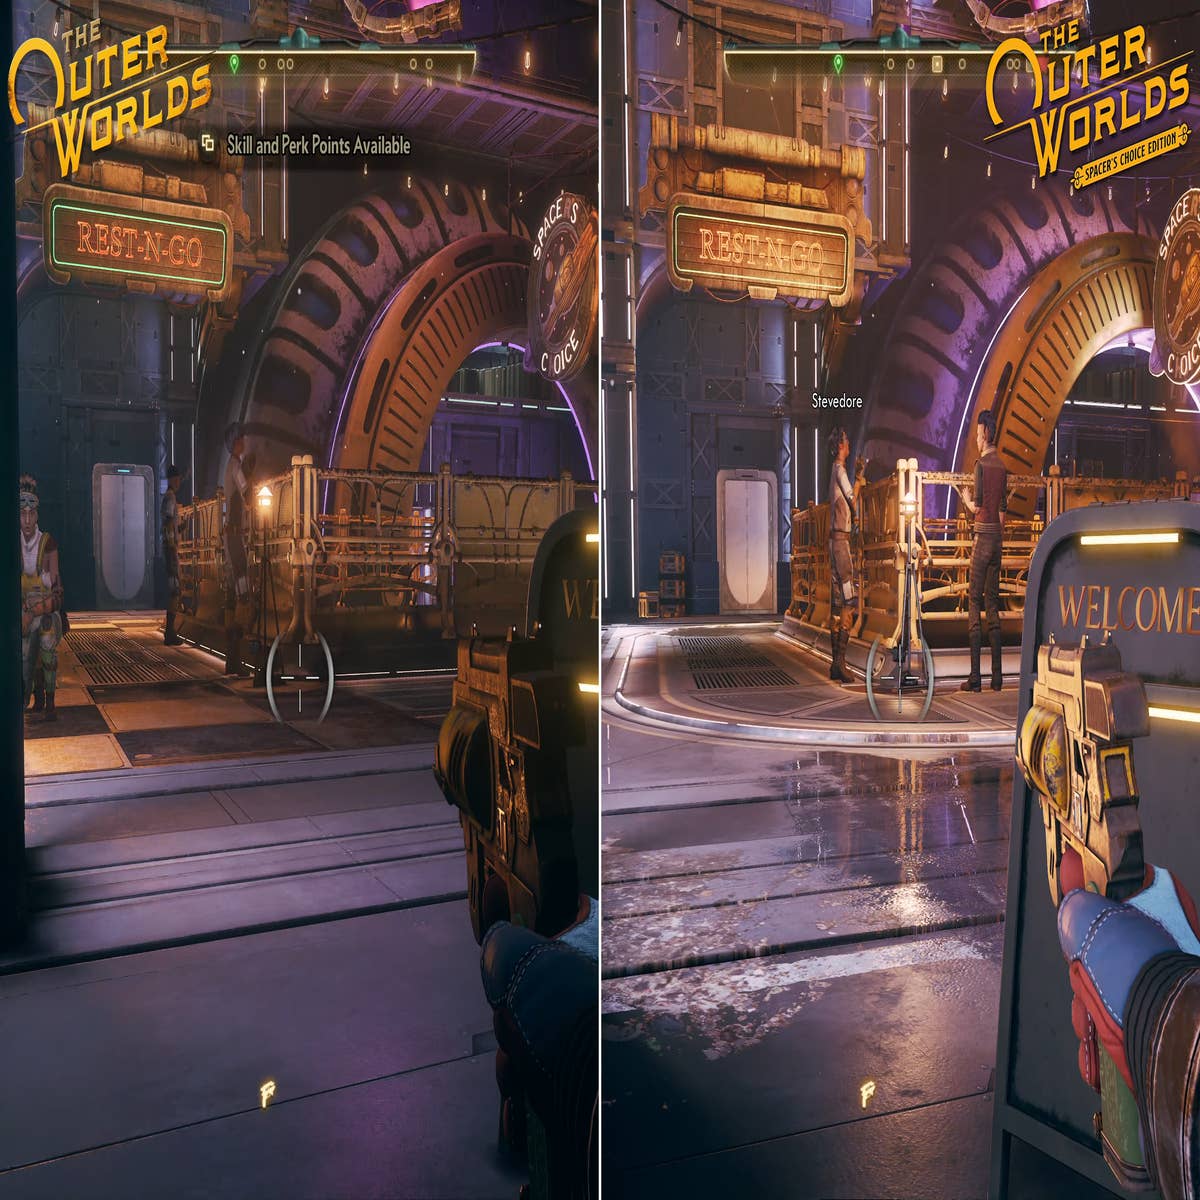 REVIEW, The Outer Worlds: Spacer's Choice Edition